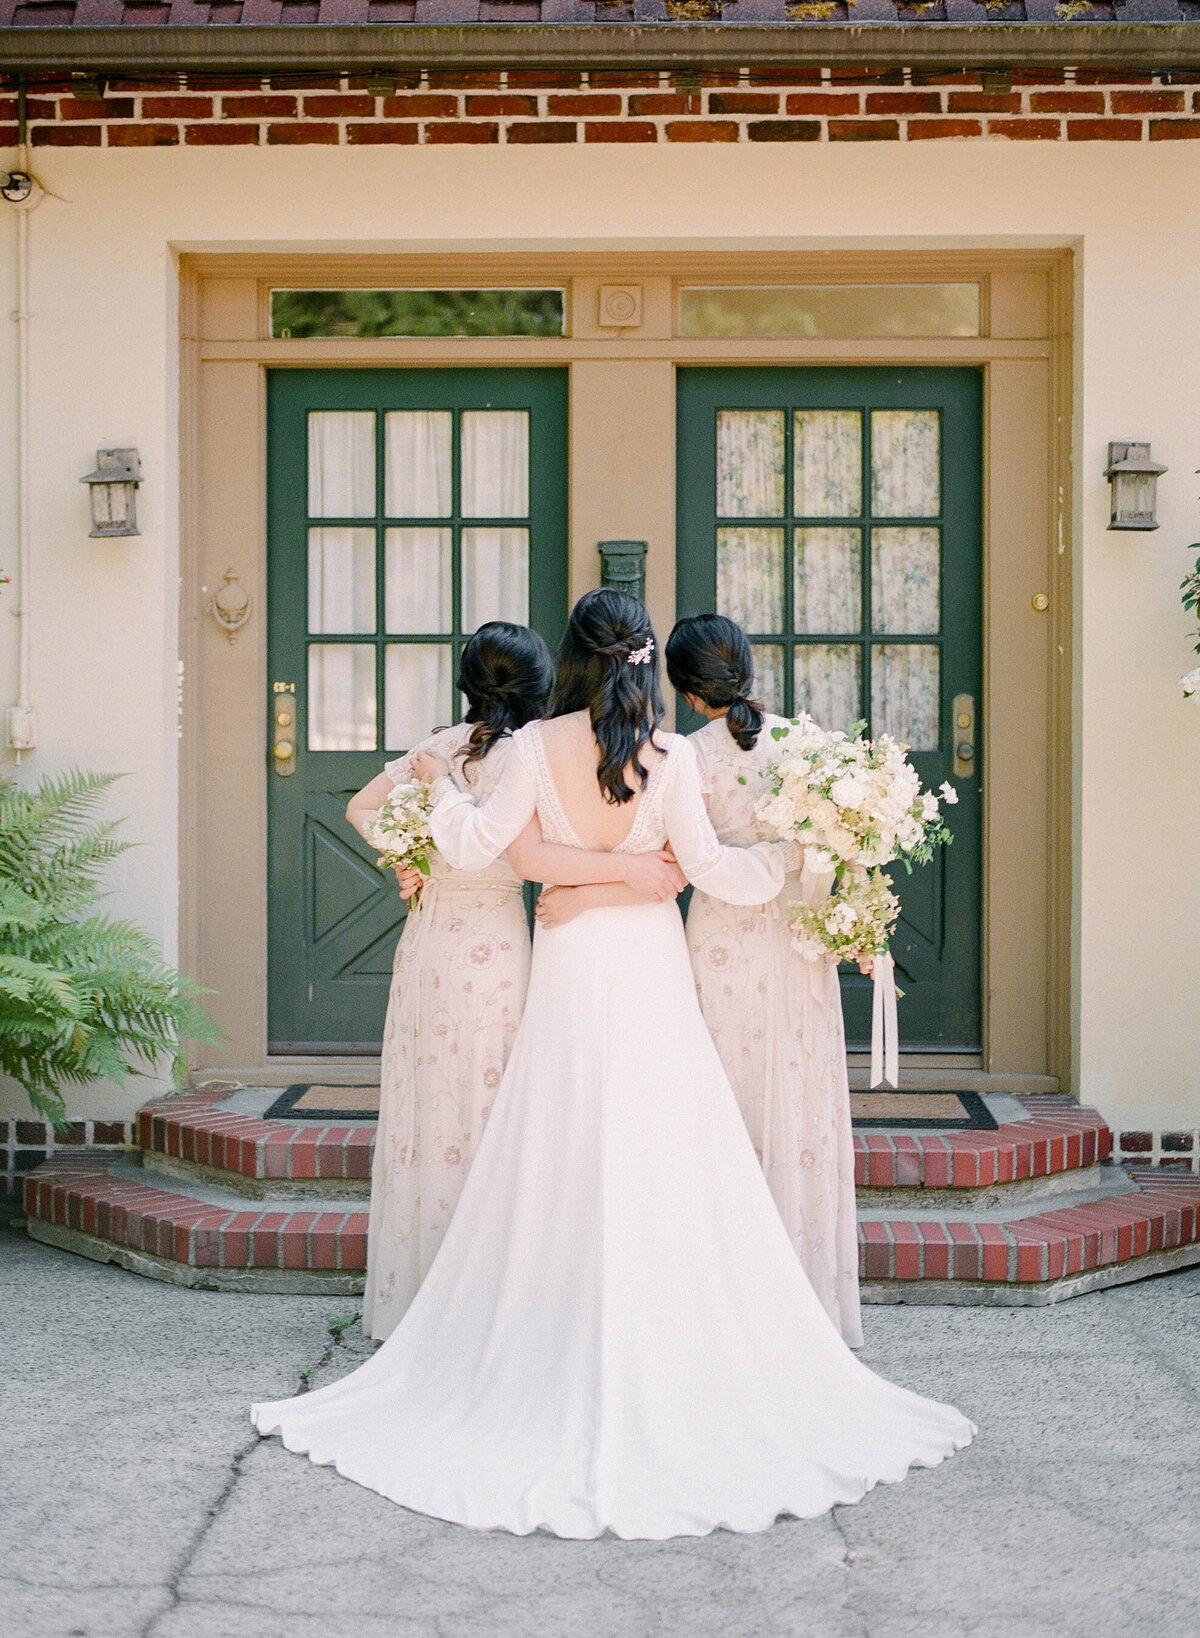 2 - Qi & Fengtao - Lairmont Manor - Kerry Jeanne Photography (28)